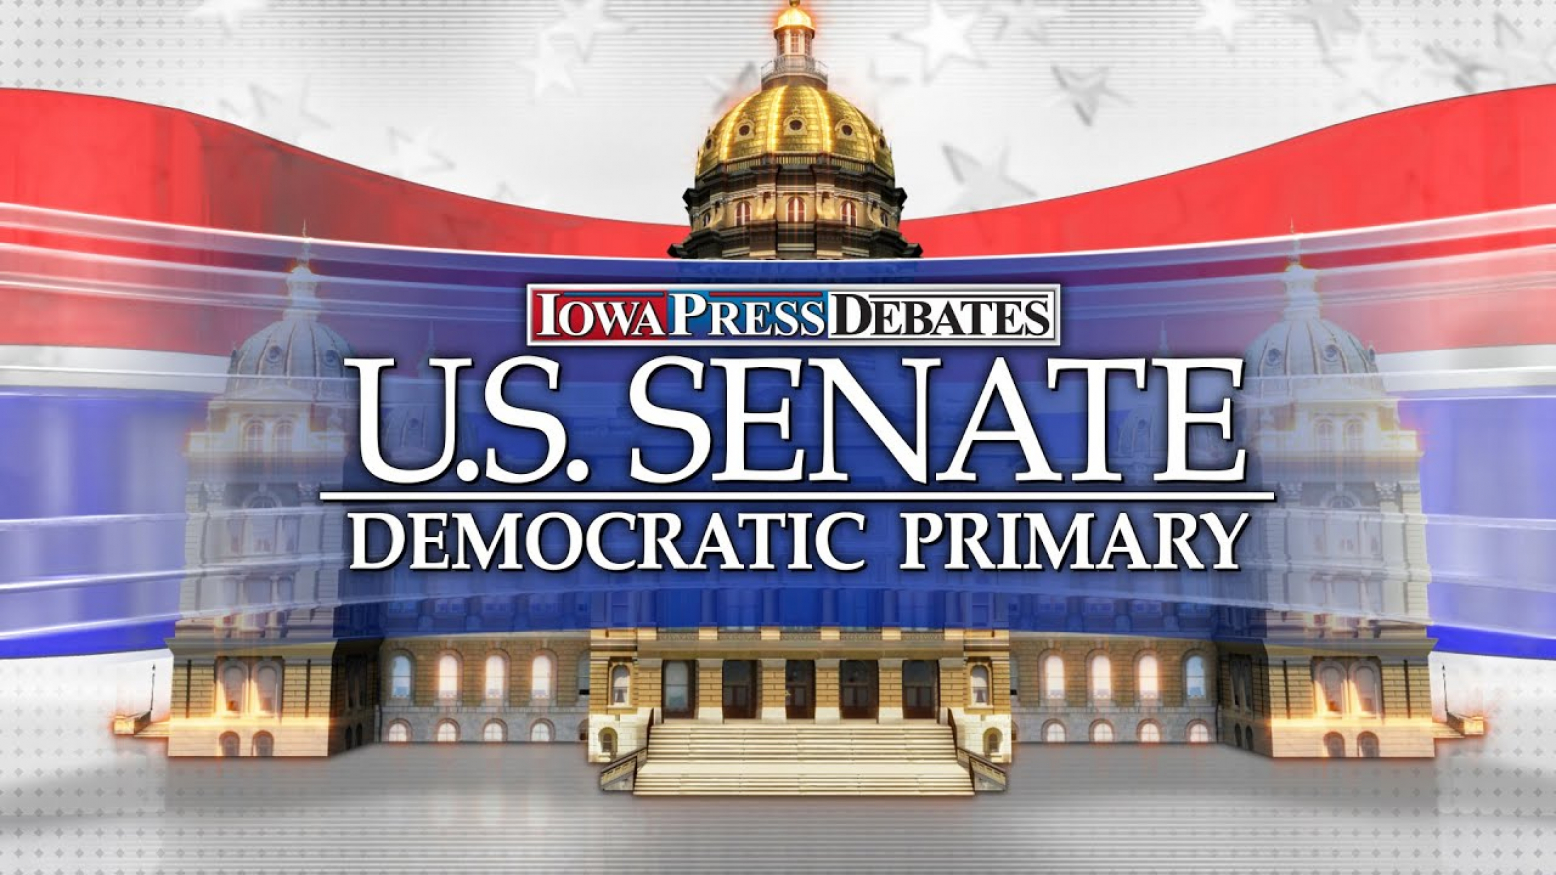 An illustration of the Iowa Capitol with a background of red, white and blue. In front of the Capitol is the logo for Iowa Press Debates: U.S. Senate Democratic Primary.